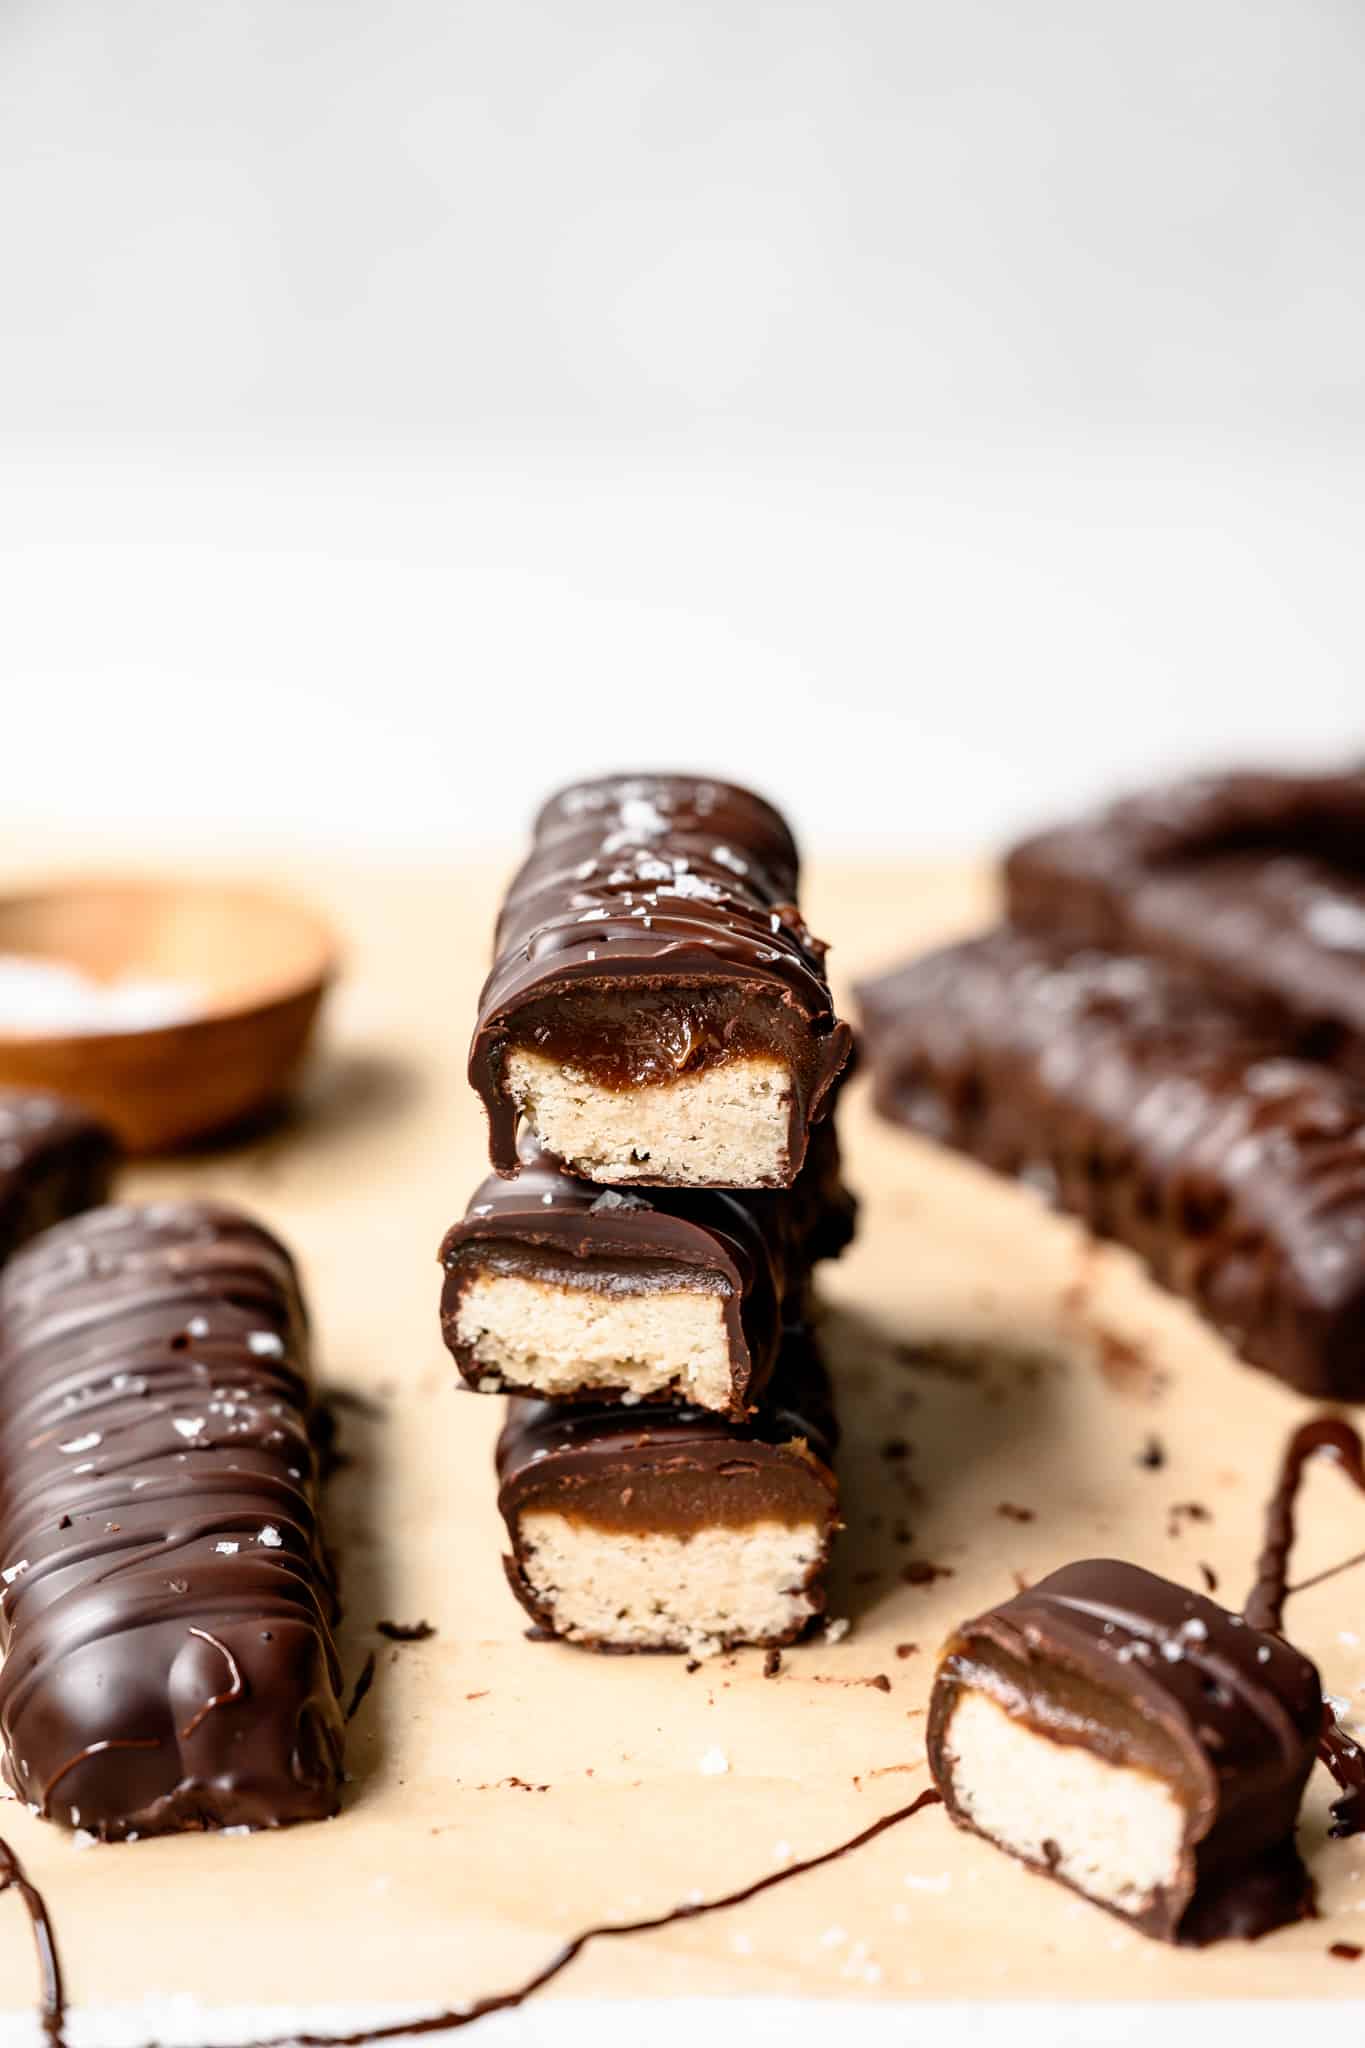 side view of 3 vegan twix bars stacked on parchment paper and cut in half to show filling